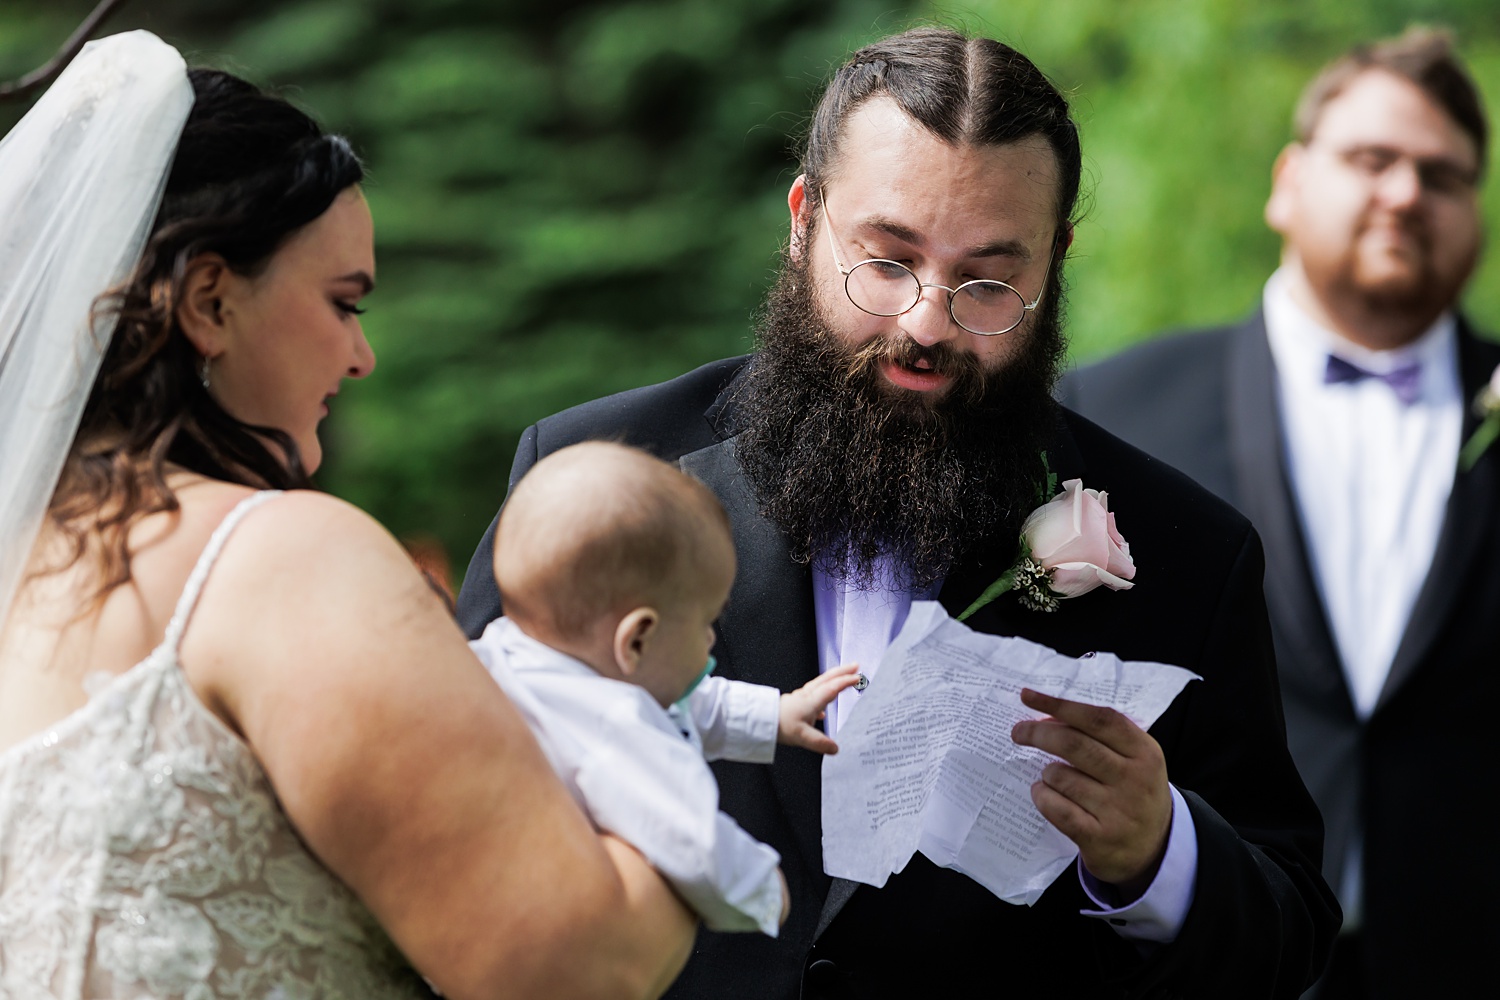 The groom reads his vows while his son reaches for the paper